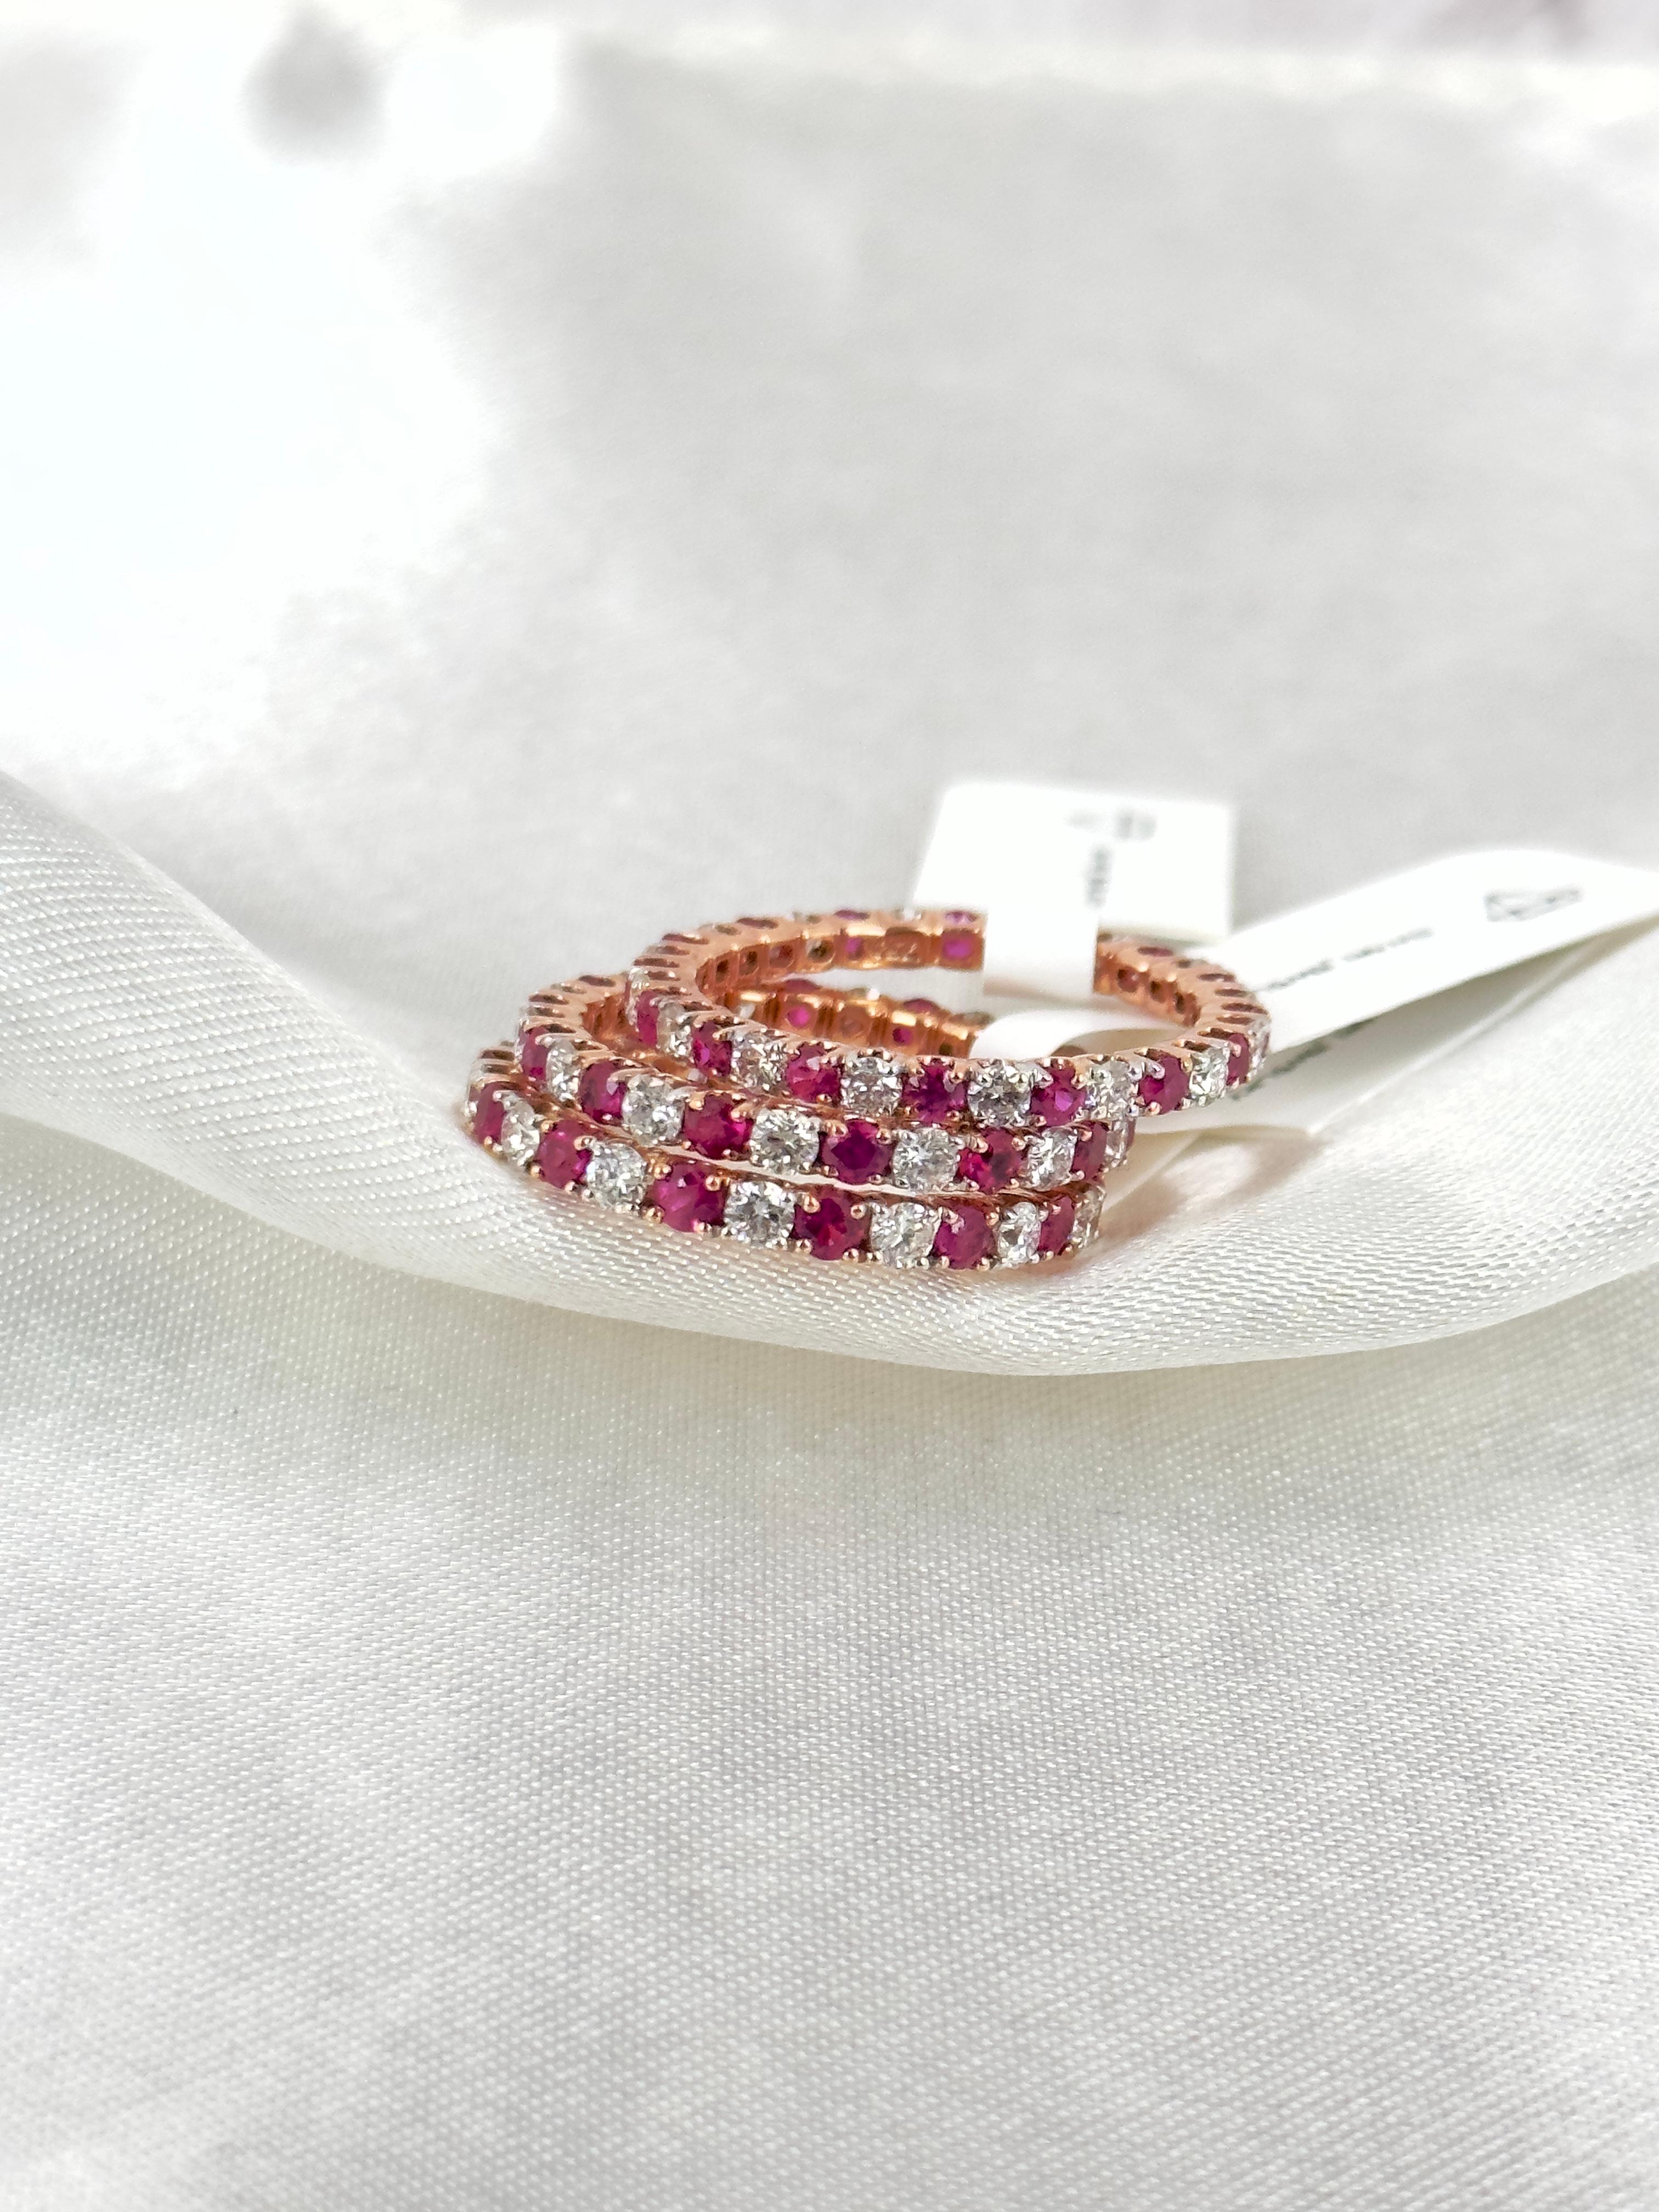 Adding to the alternating collection, our ruby and diamond eternity bands are here! Why only have one design when you can have both! Natural rubies and diamonds set in solid rose gold will surprise you. The shine, the luster, the look, and the feel